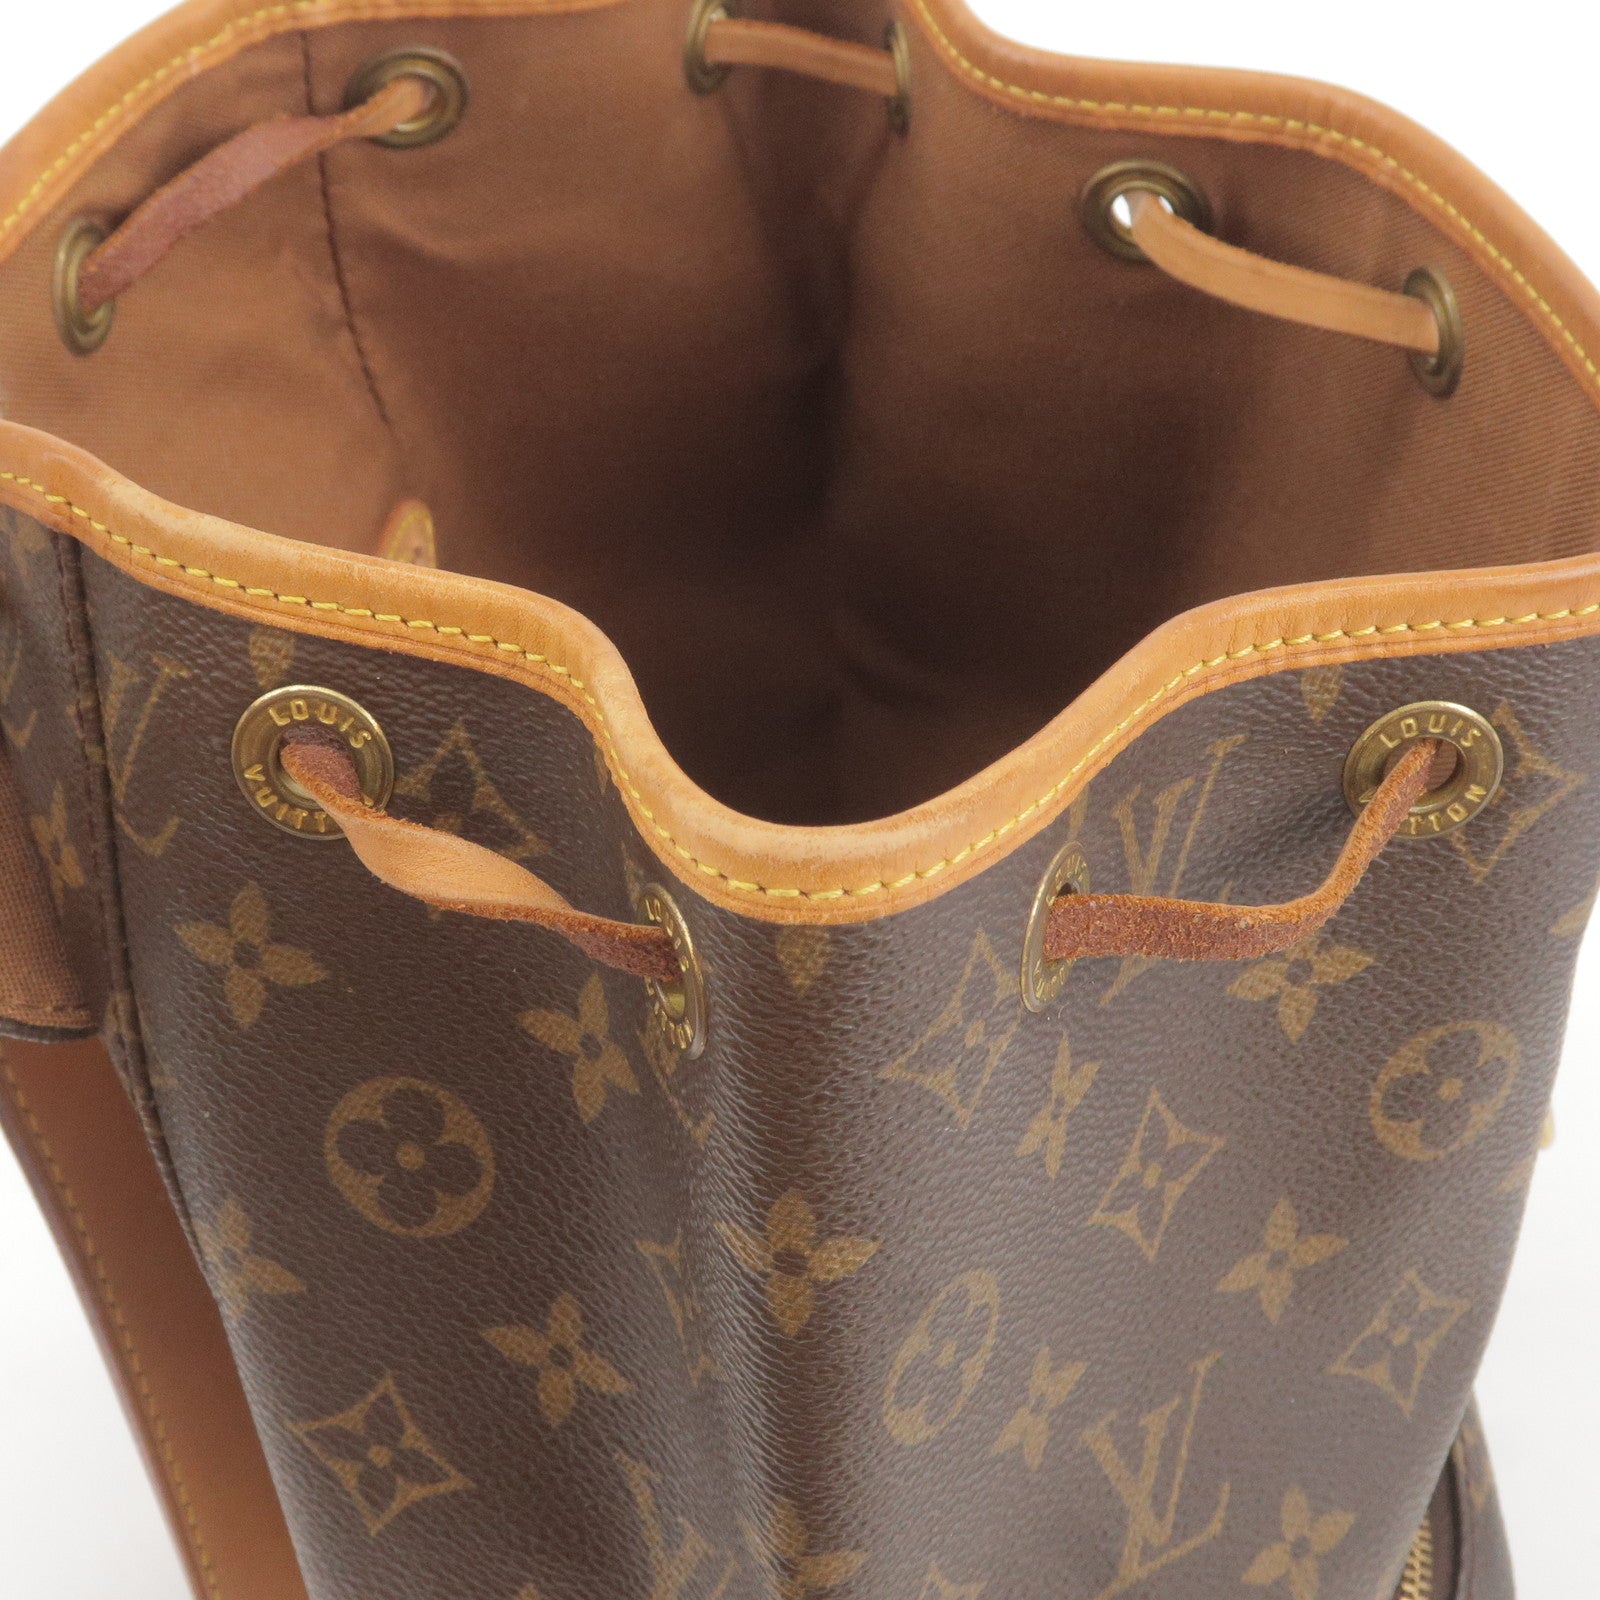 The Supreme x Louis Vuitton Footwear Collection has been officially  unveiled as - ep_vintage luxury Store - Monogram - M51136 – dct - Bag -  Vuitton - Montsouris - Pack - Louis - MM - Back